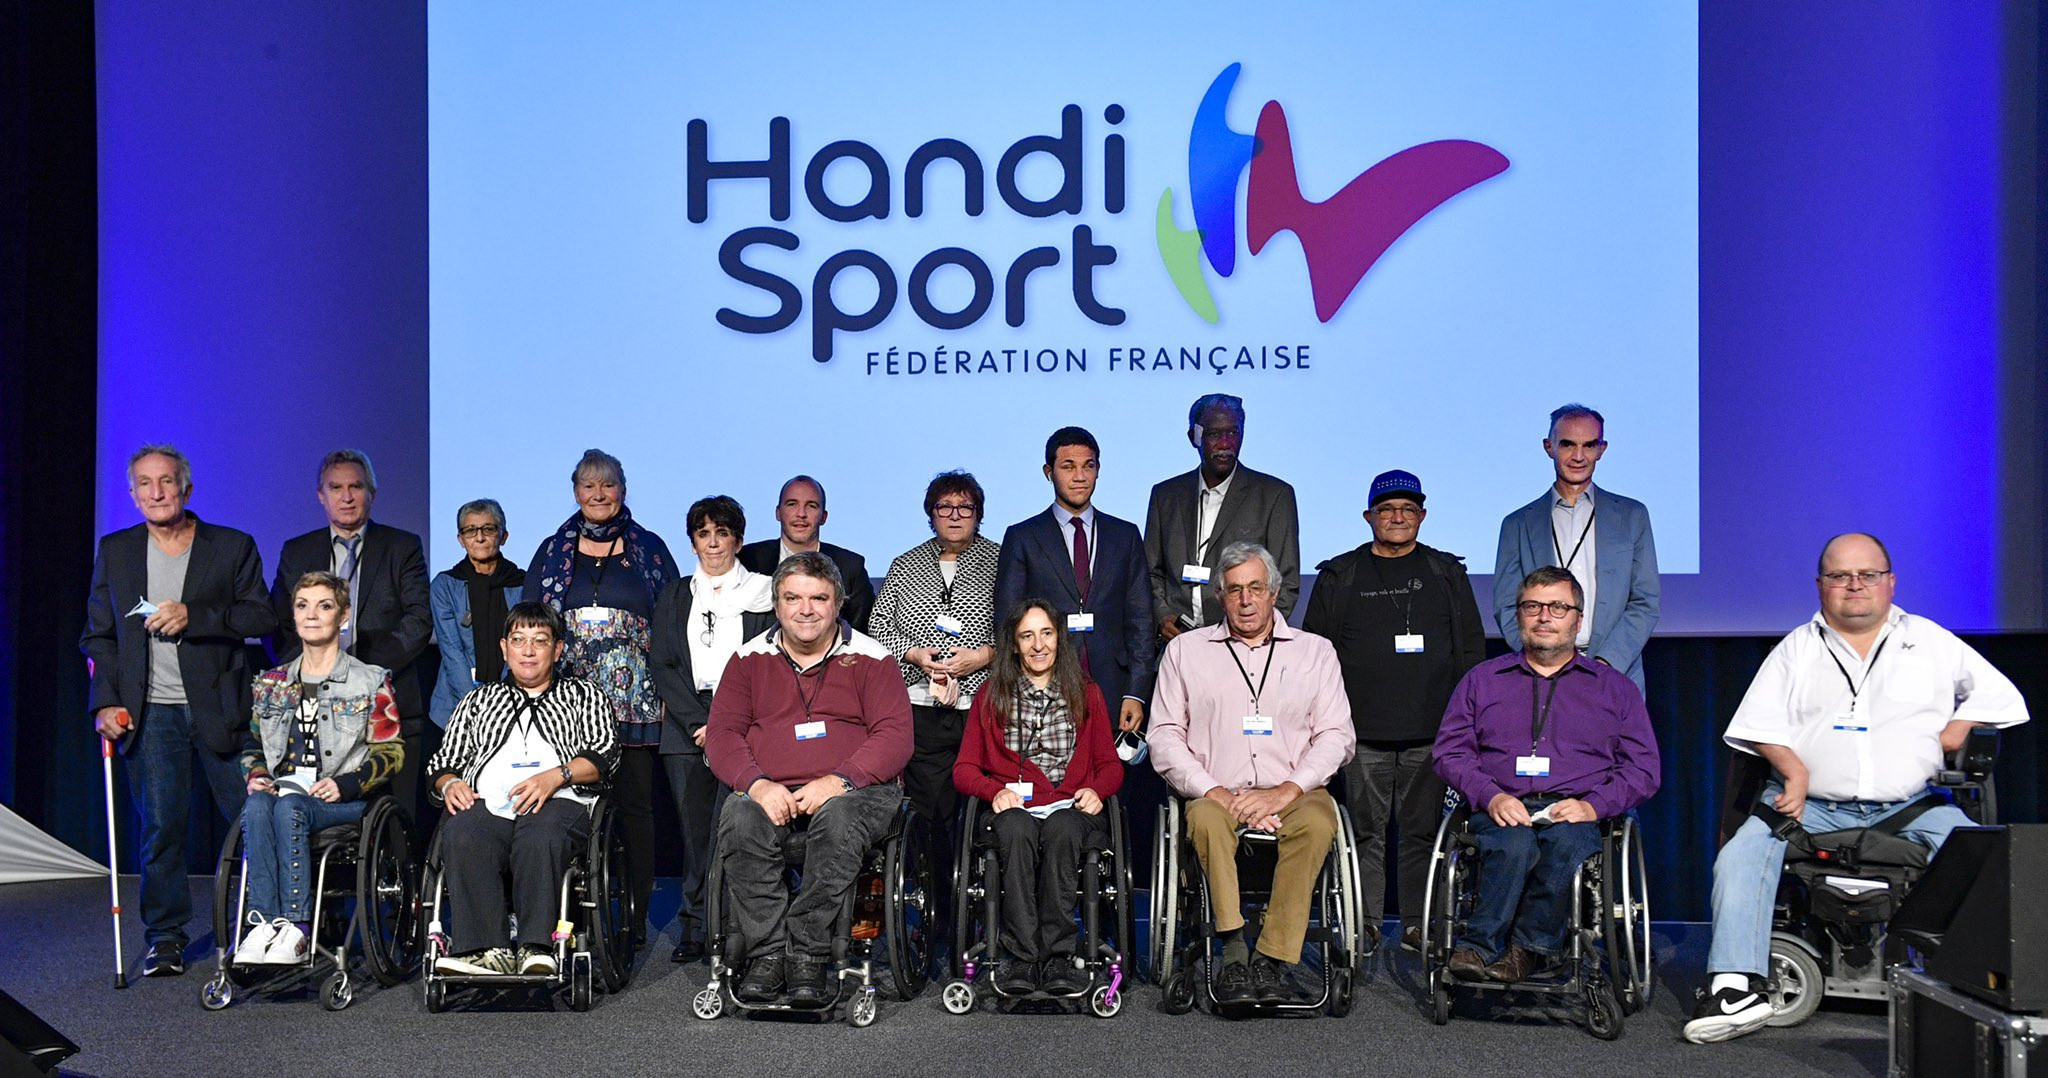 Paralympic medallist Westelynck re-elected French Handisport Federation President through to Paris 2024